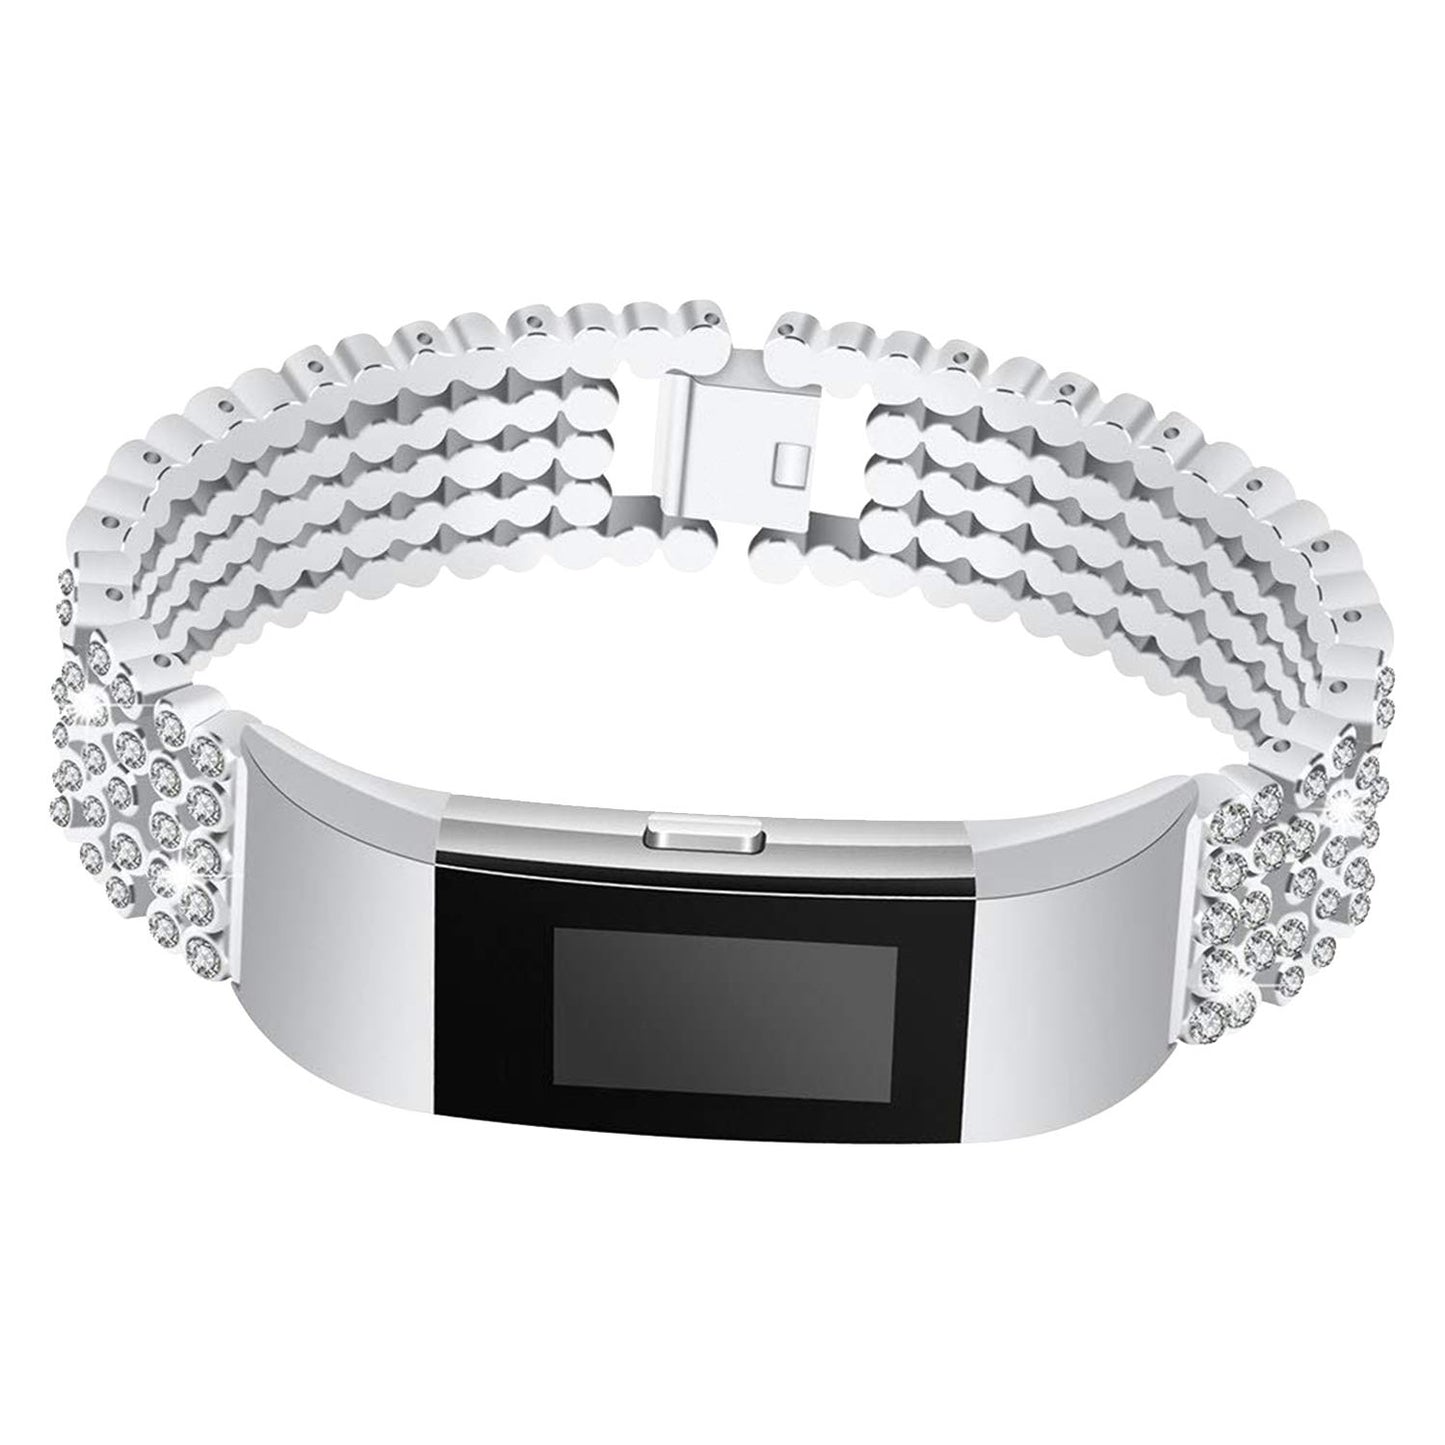 Metal Rhinestone Bracelet for Fitbit Charge 2